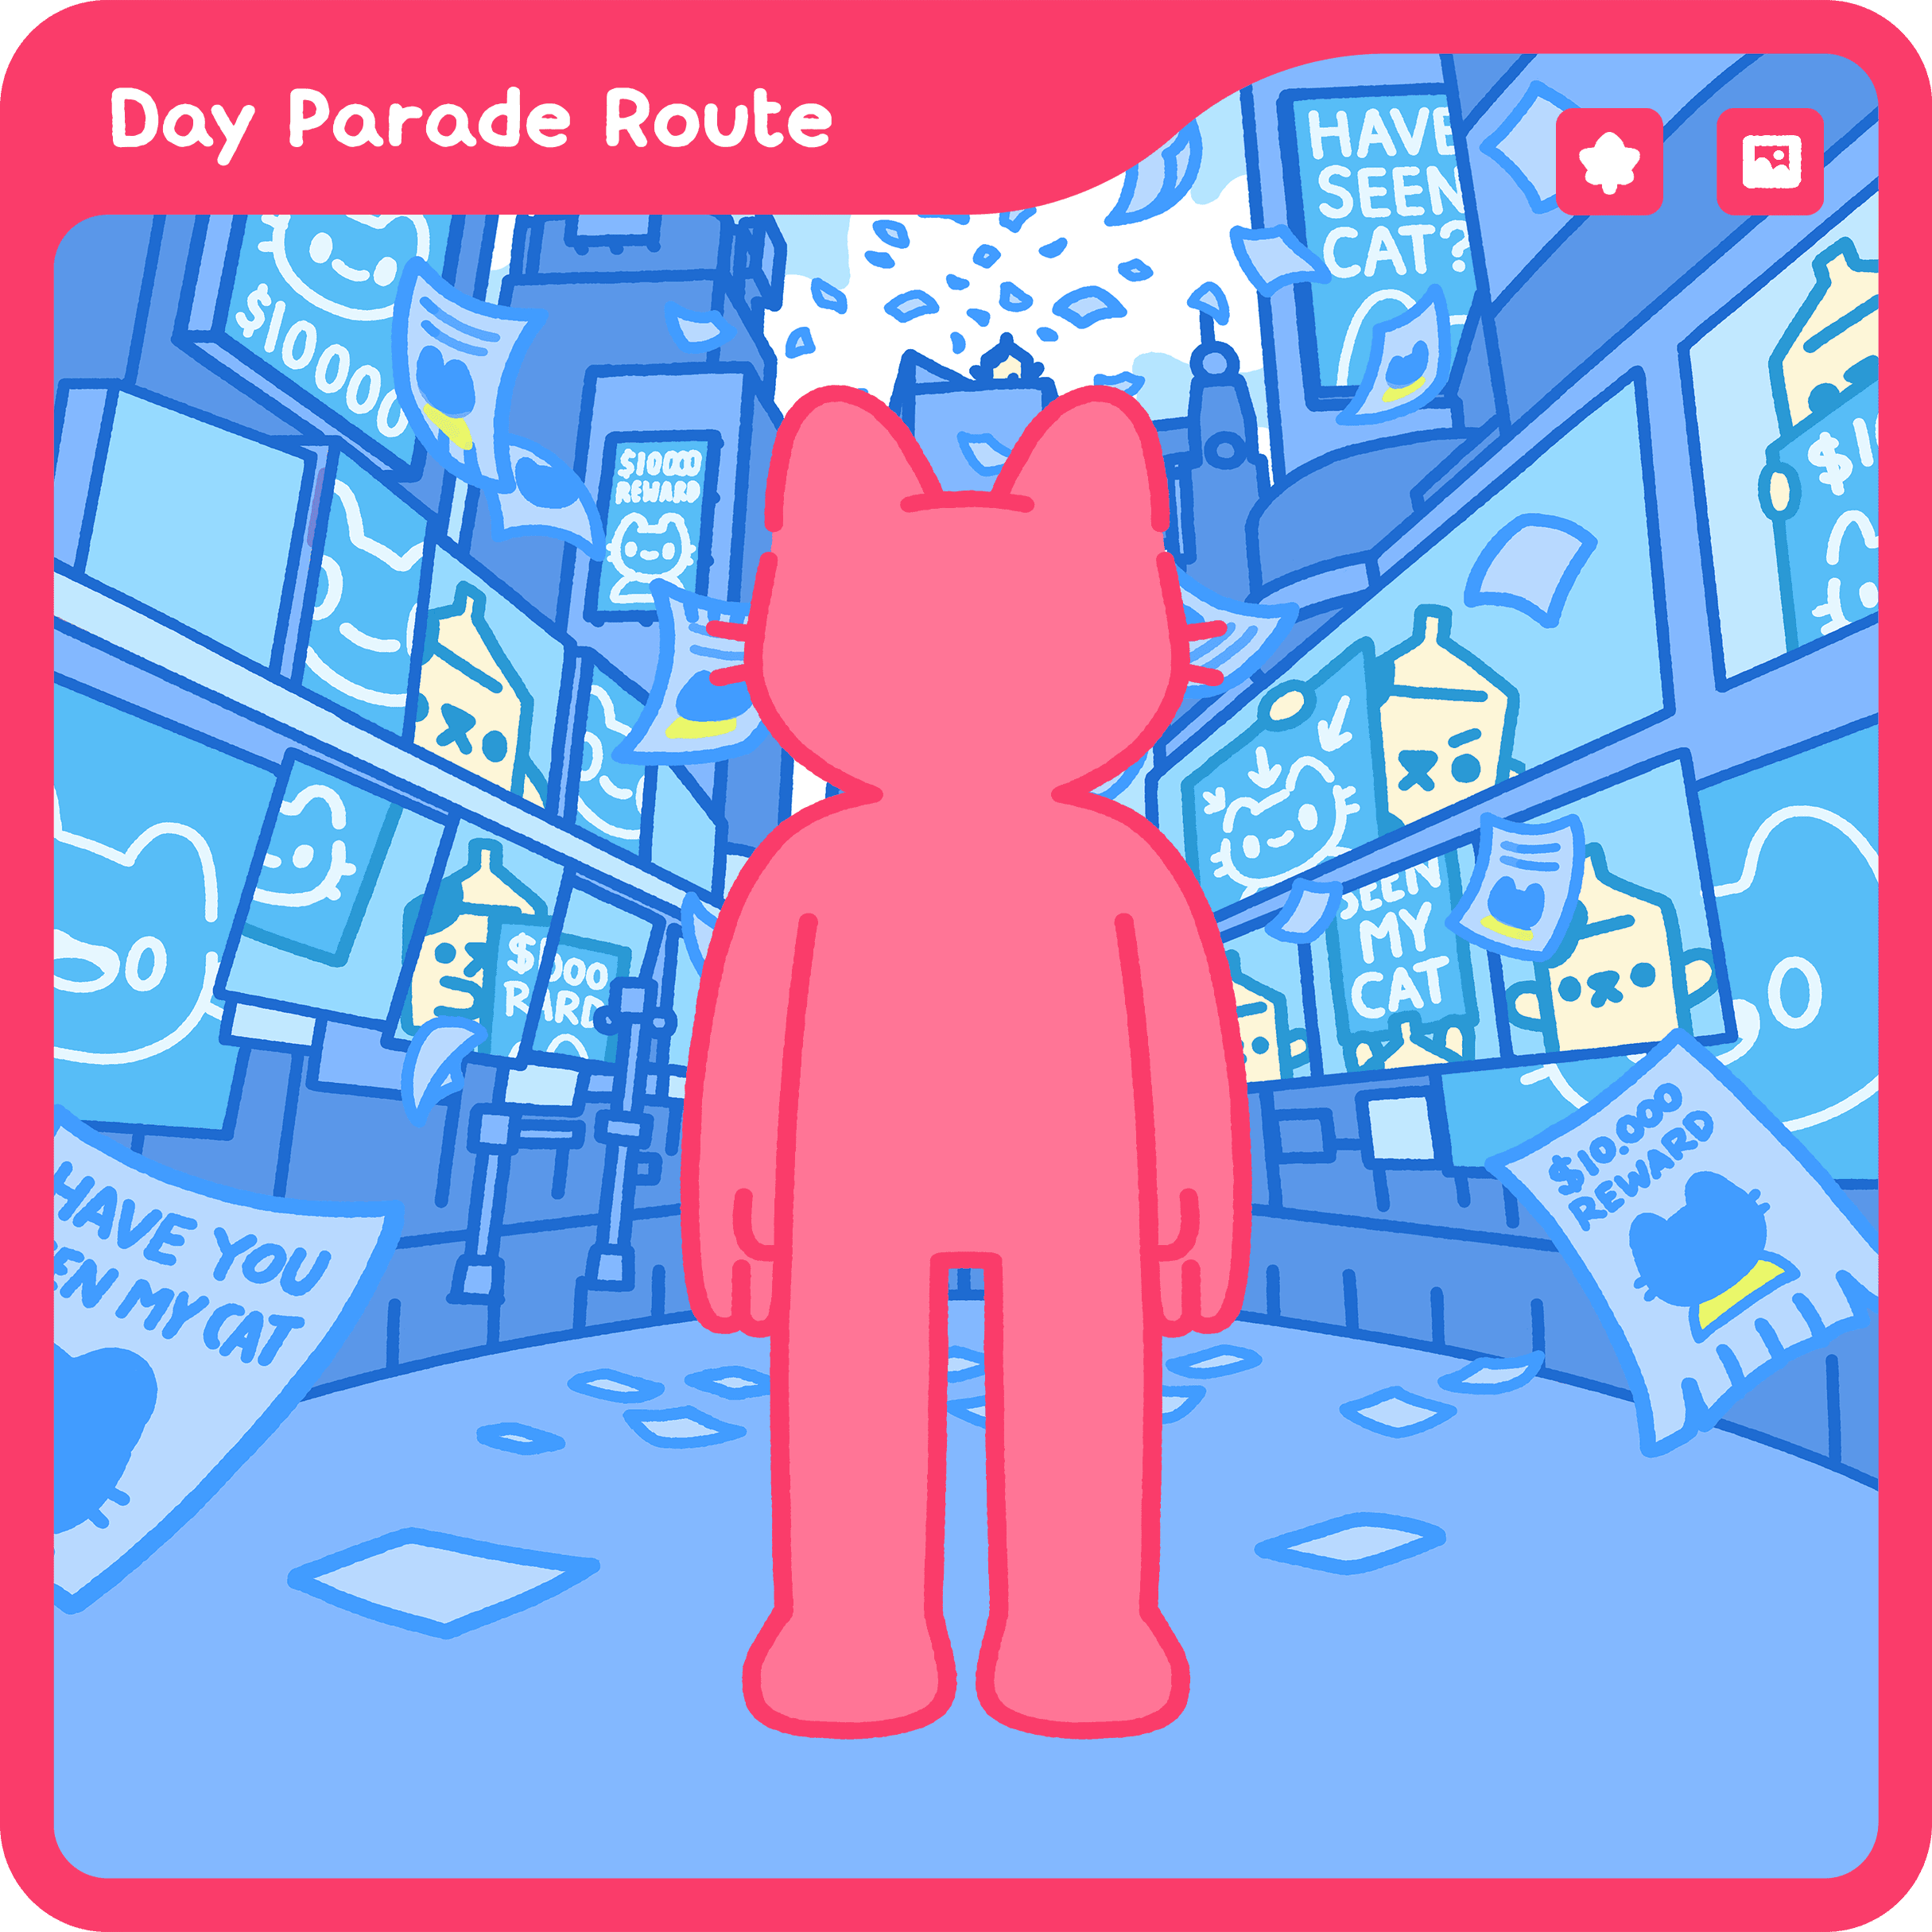 Day Parade Route